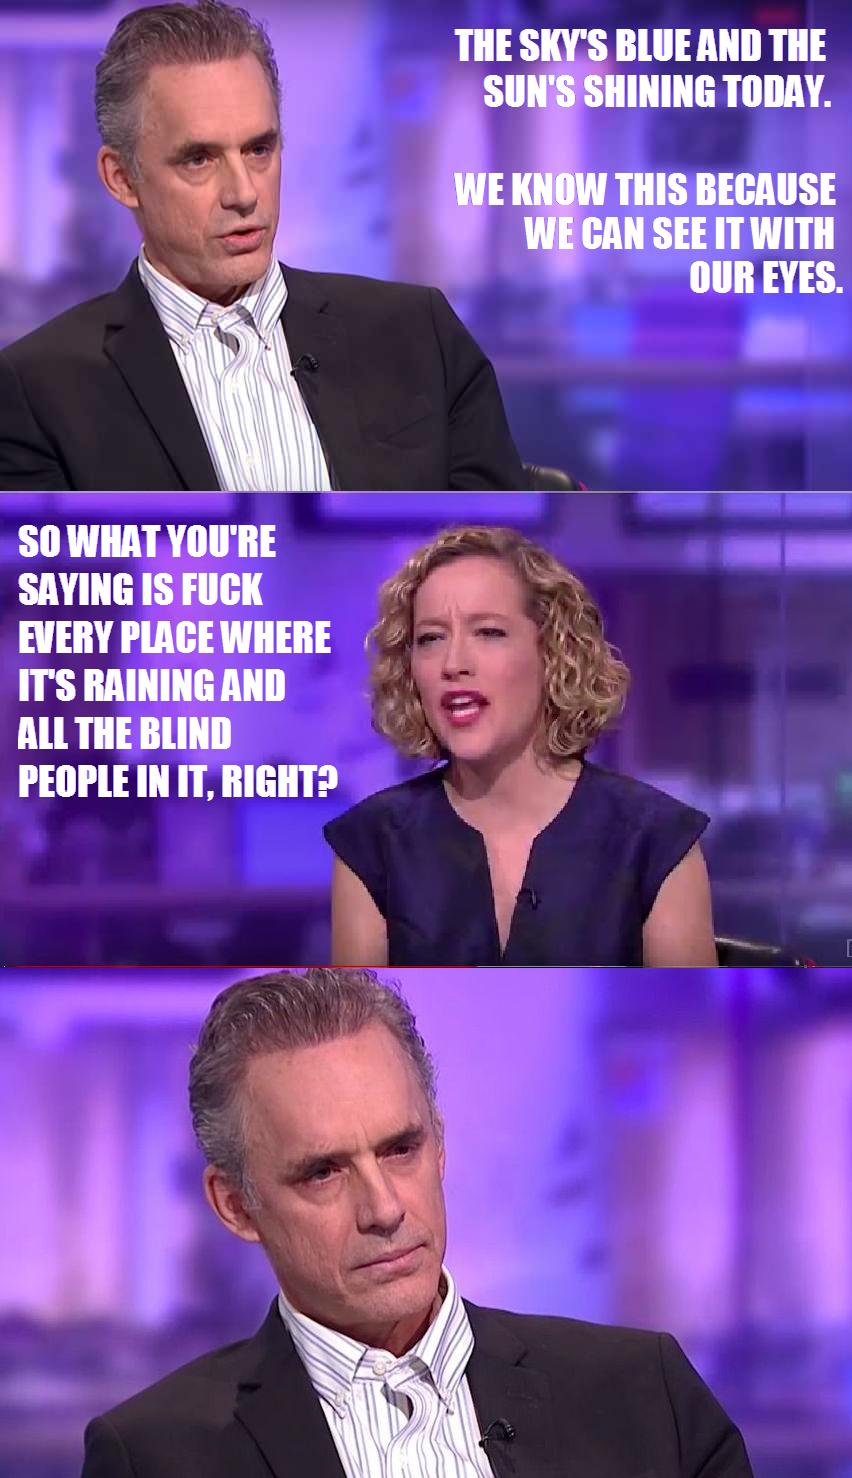 Beskæftiget Suri længde Harold Smith on Twitter: "Basically what the JBP vs Cathy Newman interview  boiled down to... 🤦‍♂️🤦‍♂️🤦‍♂️ #CathyNewman #JordanPeterson #Memes  #politicalcorrectness https://t.co/h9VRzMOXwH" / Twitter